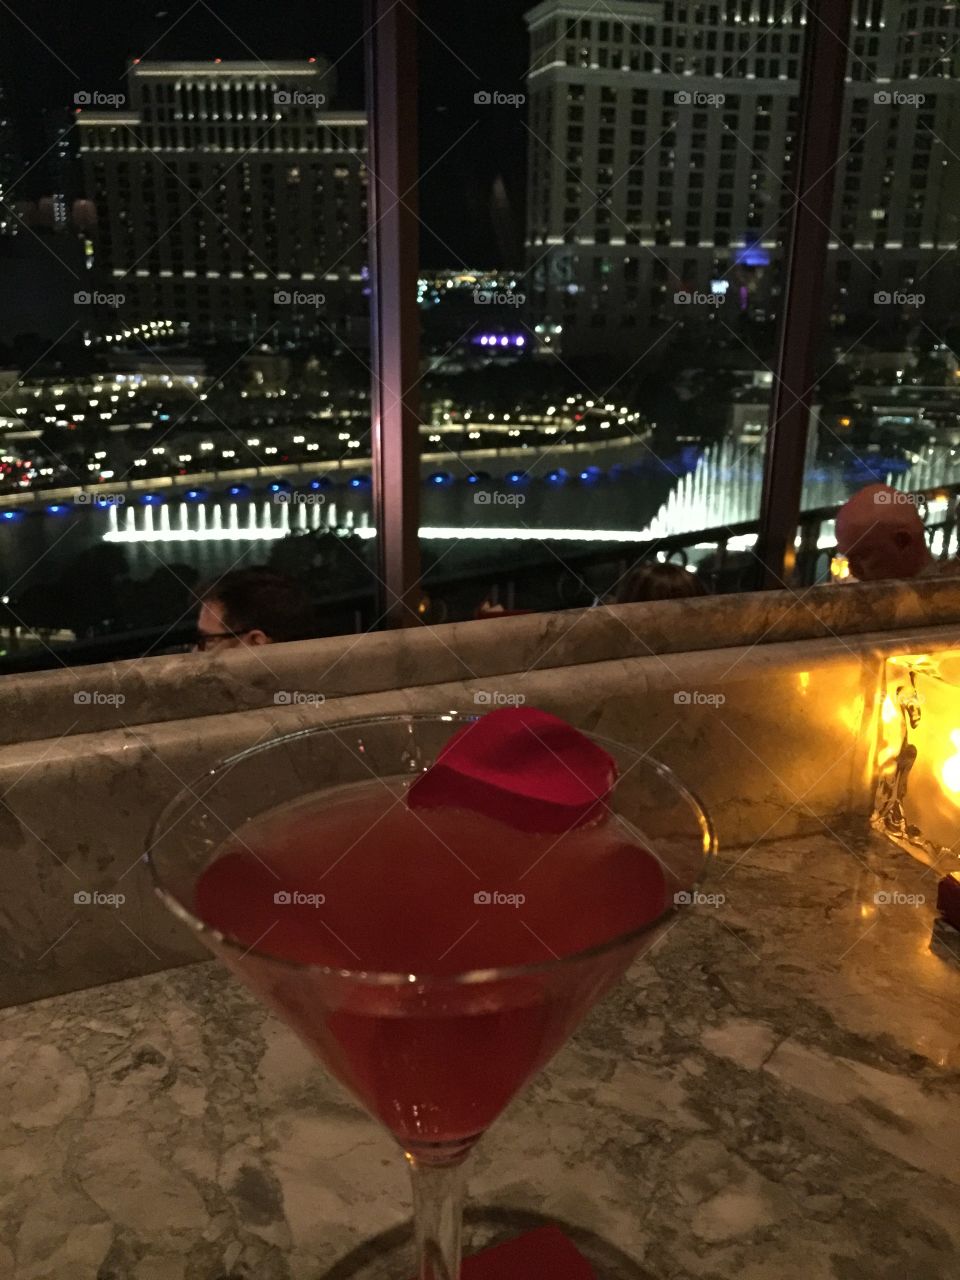 Rose petal martini overlooking the fountains of the Bellagio